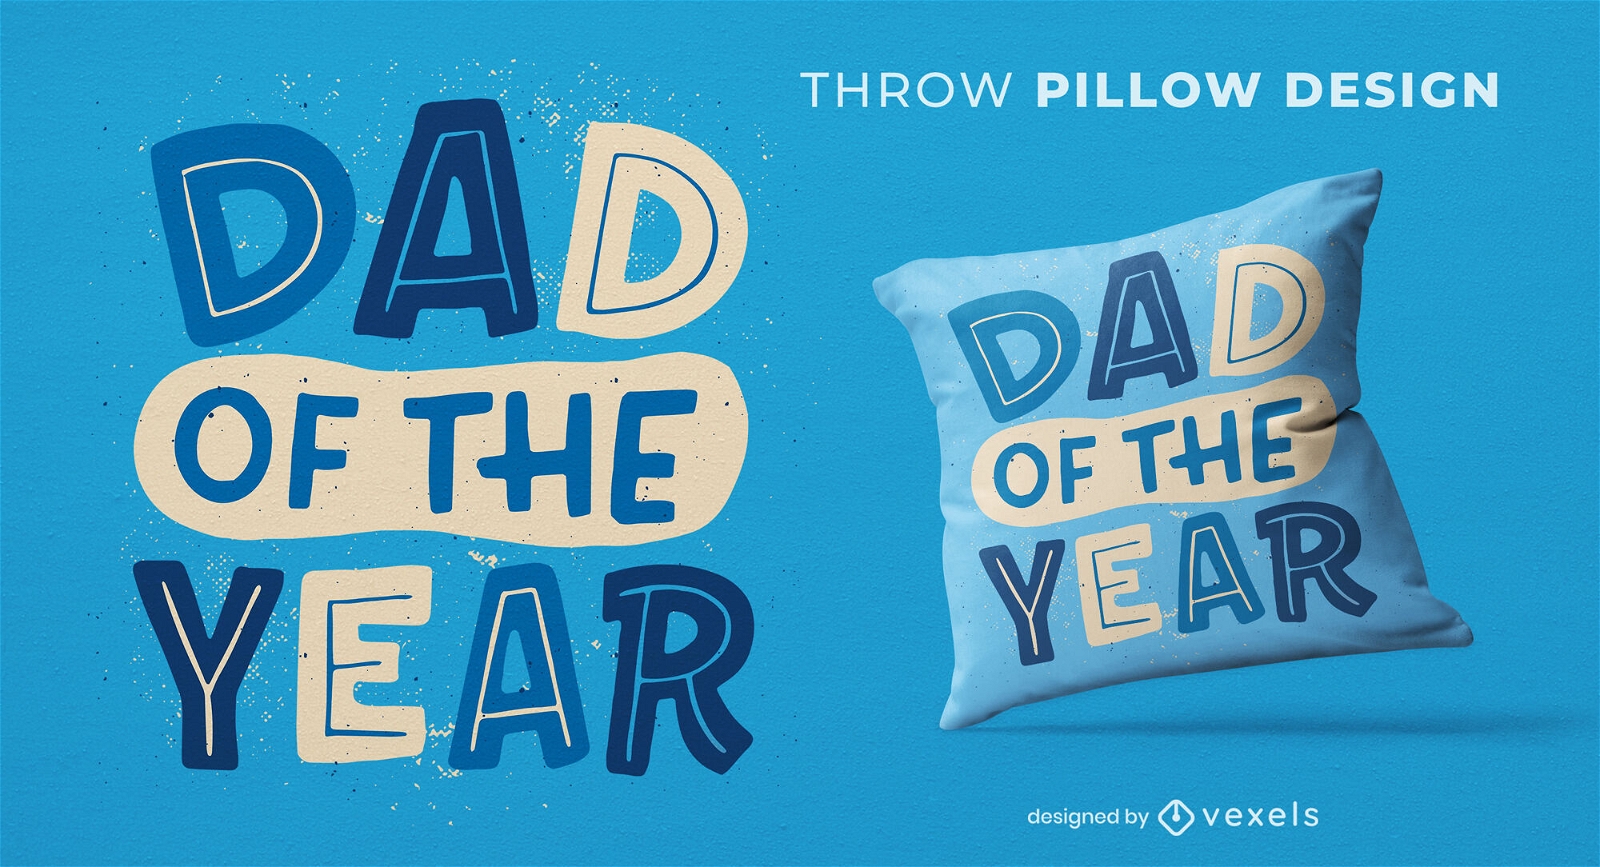 Dad of the year throw pillow design